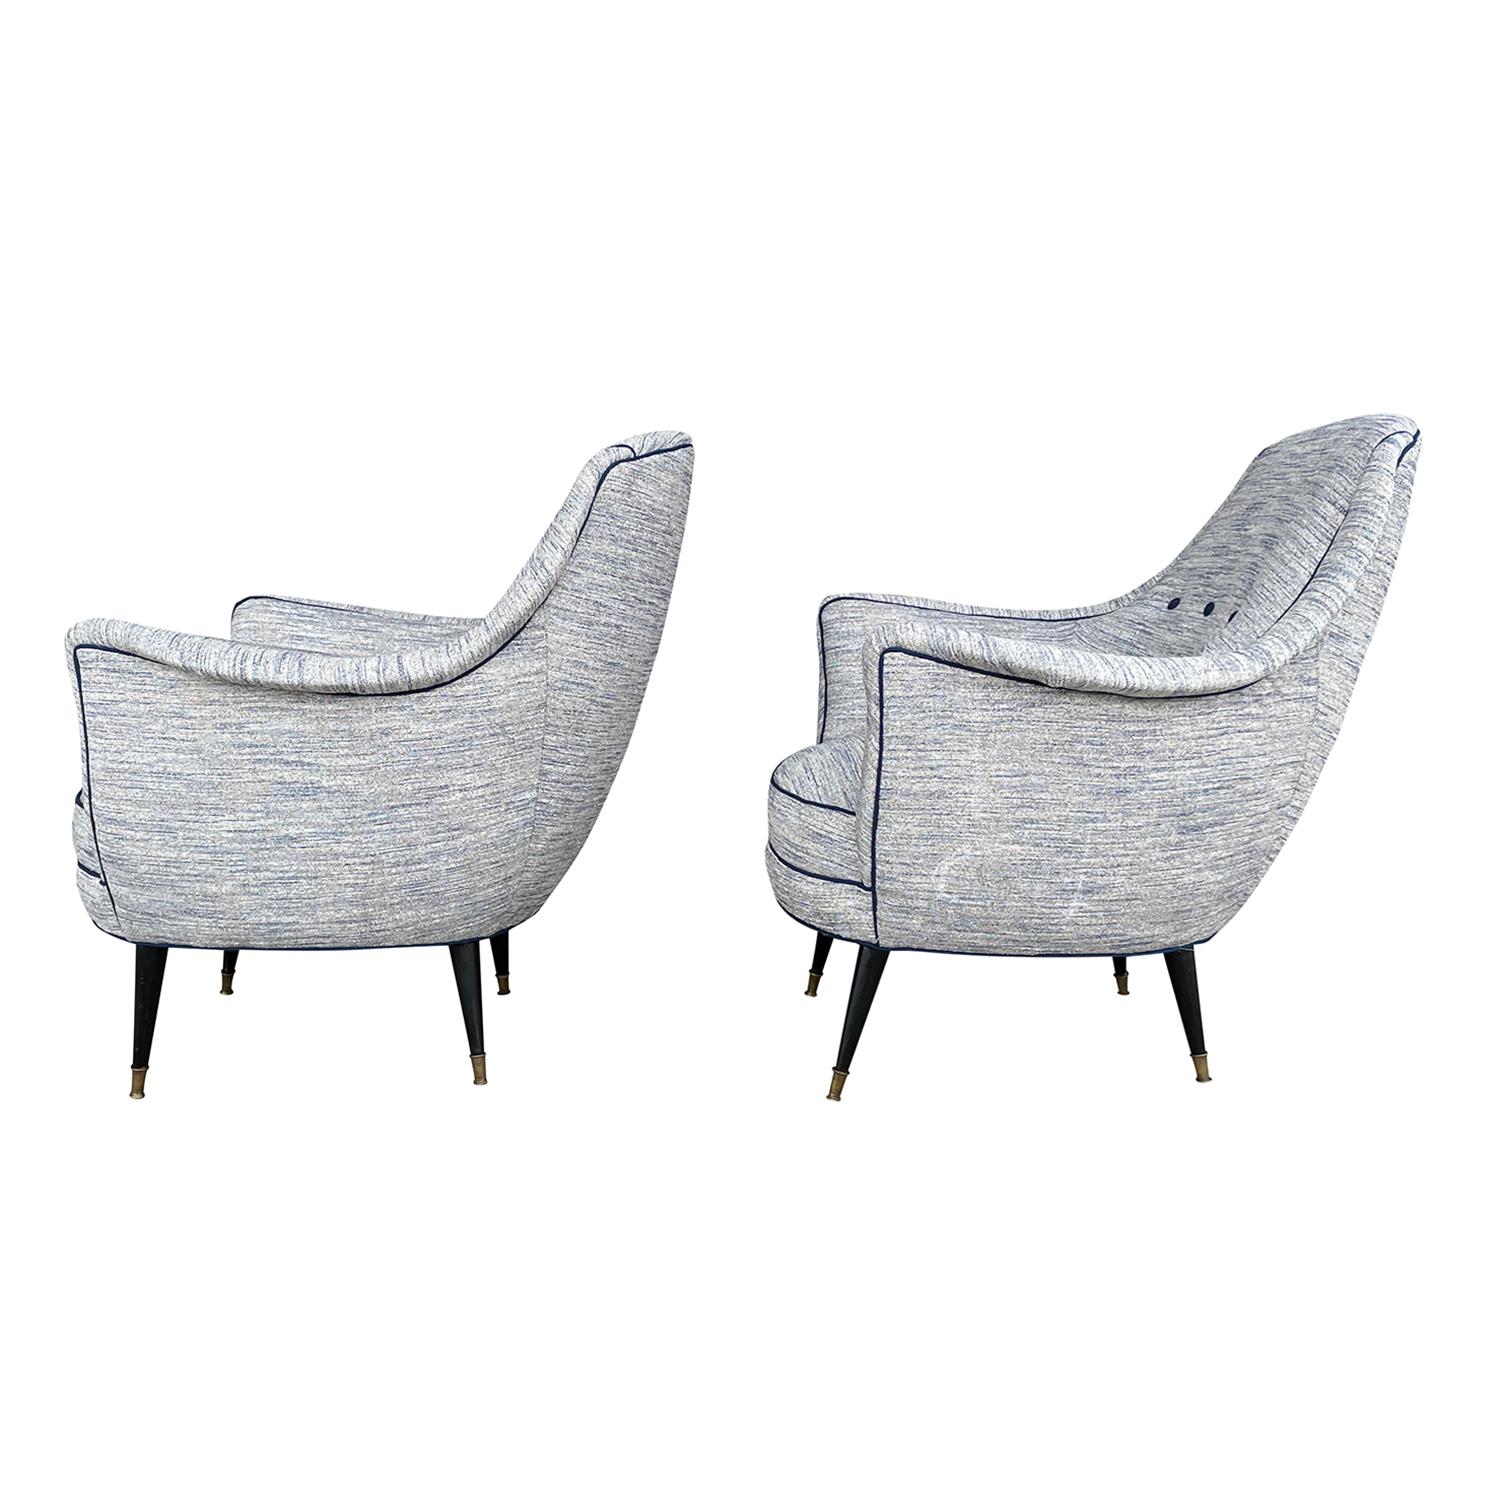 Hand-Crafted 20th Century Light-Blue Italian Pair of Vintage Lounge Chairs by Ico Parisi For Sale